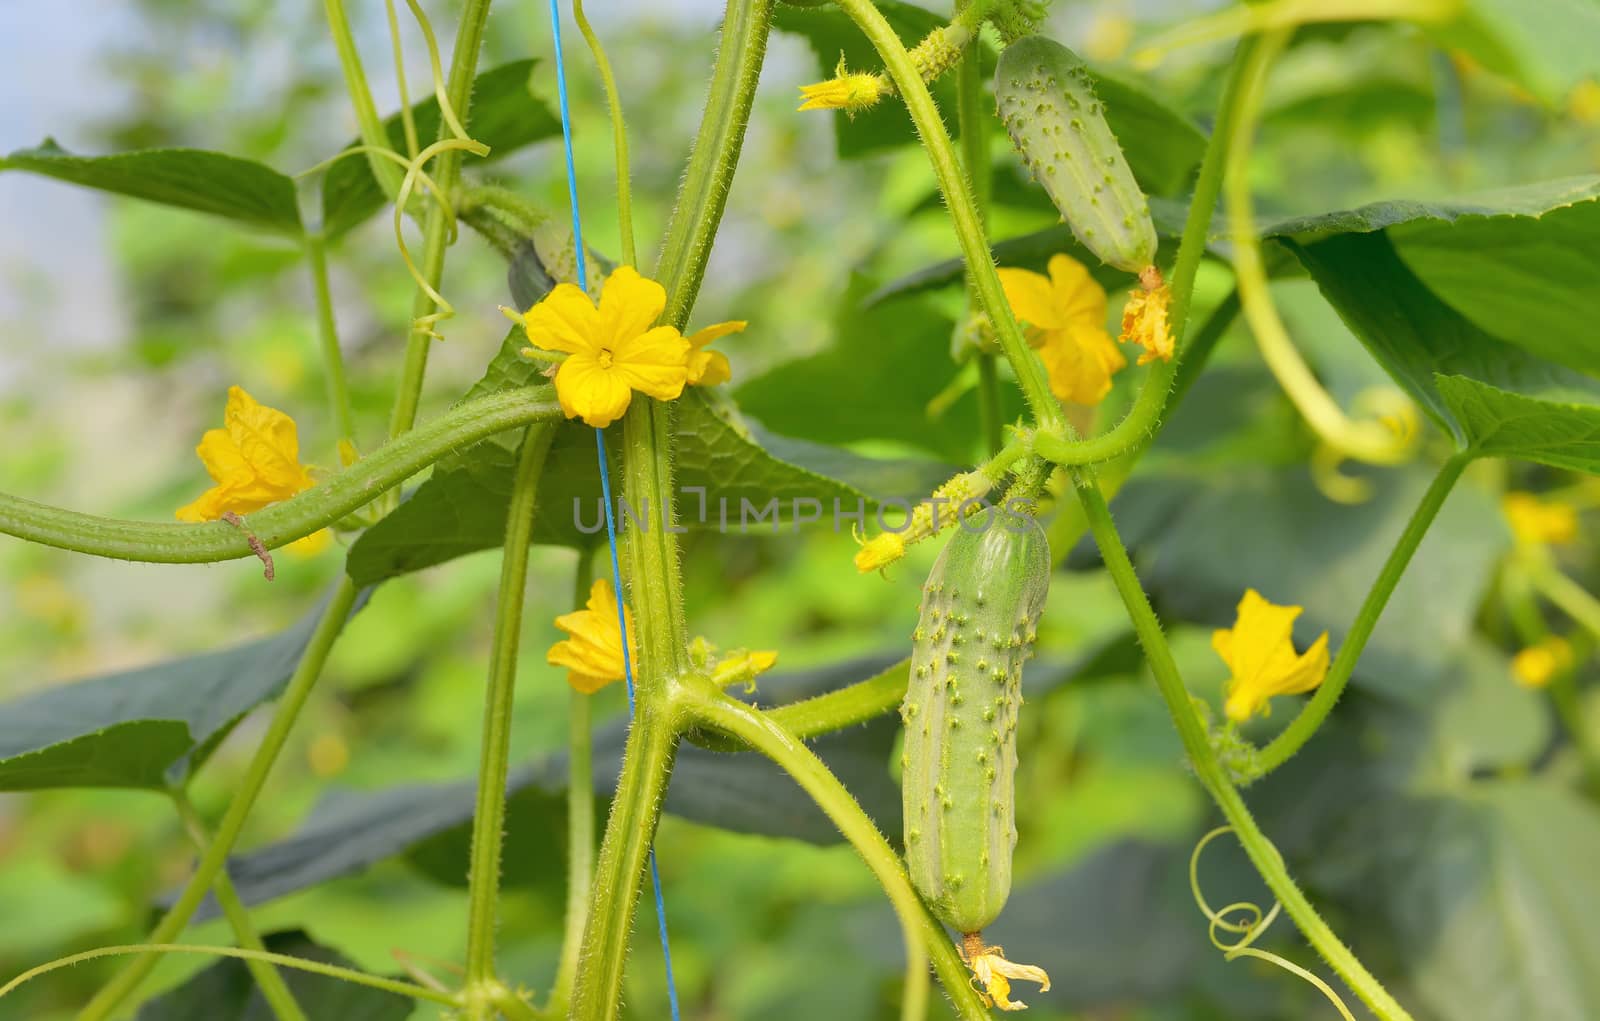 cucumbers growing on a vine in greenhouse